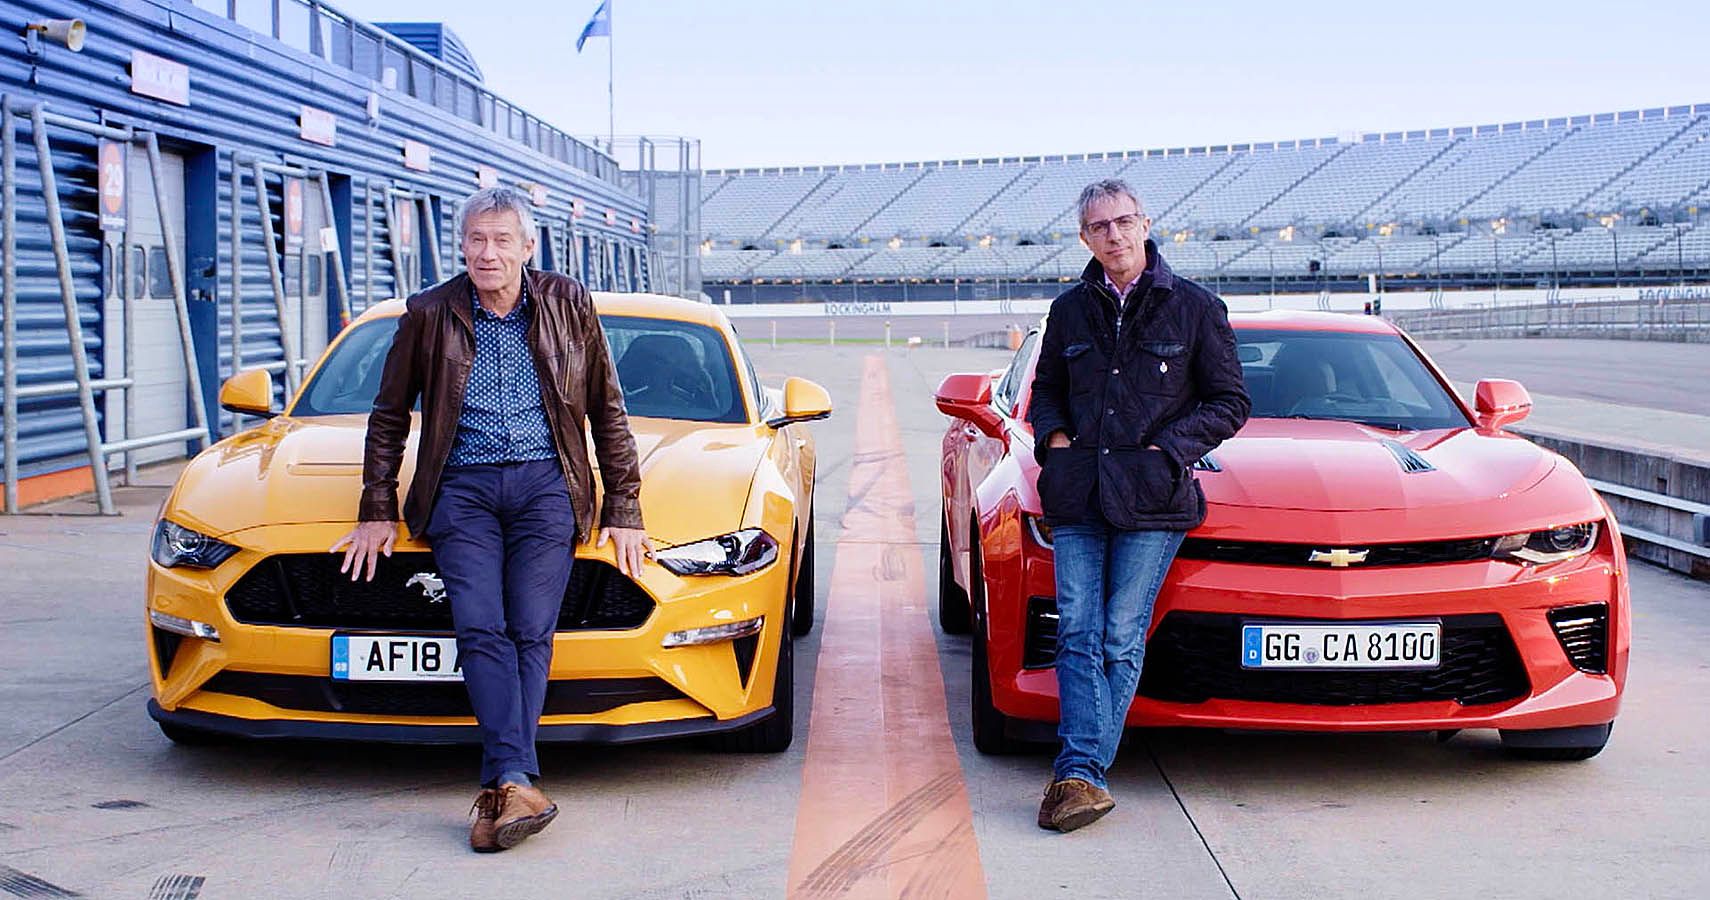 Fifth Gear: Top Gear’s Well-Running Competition